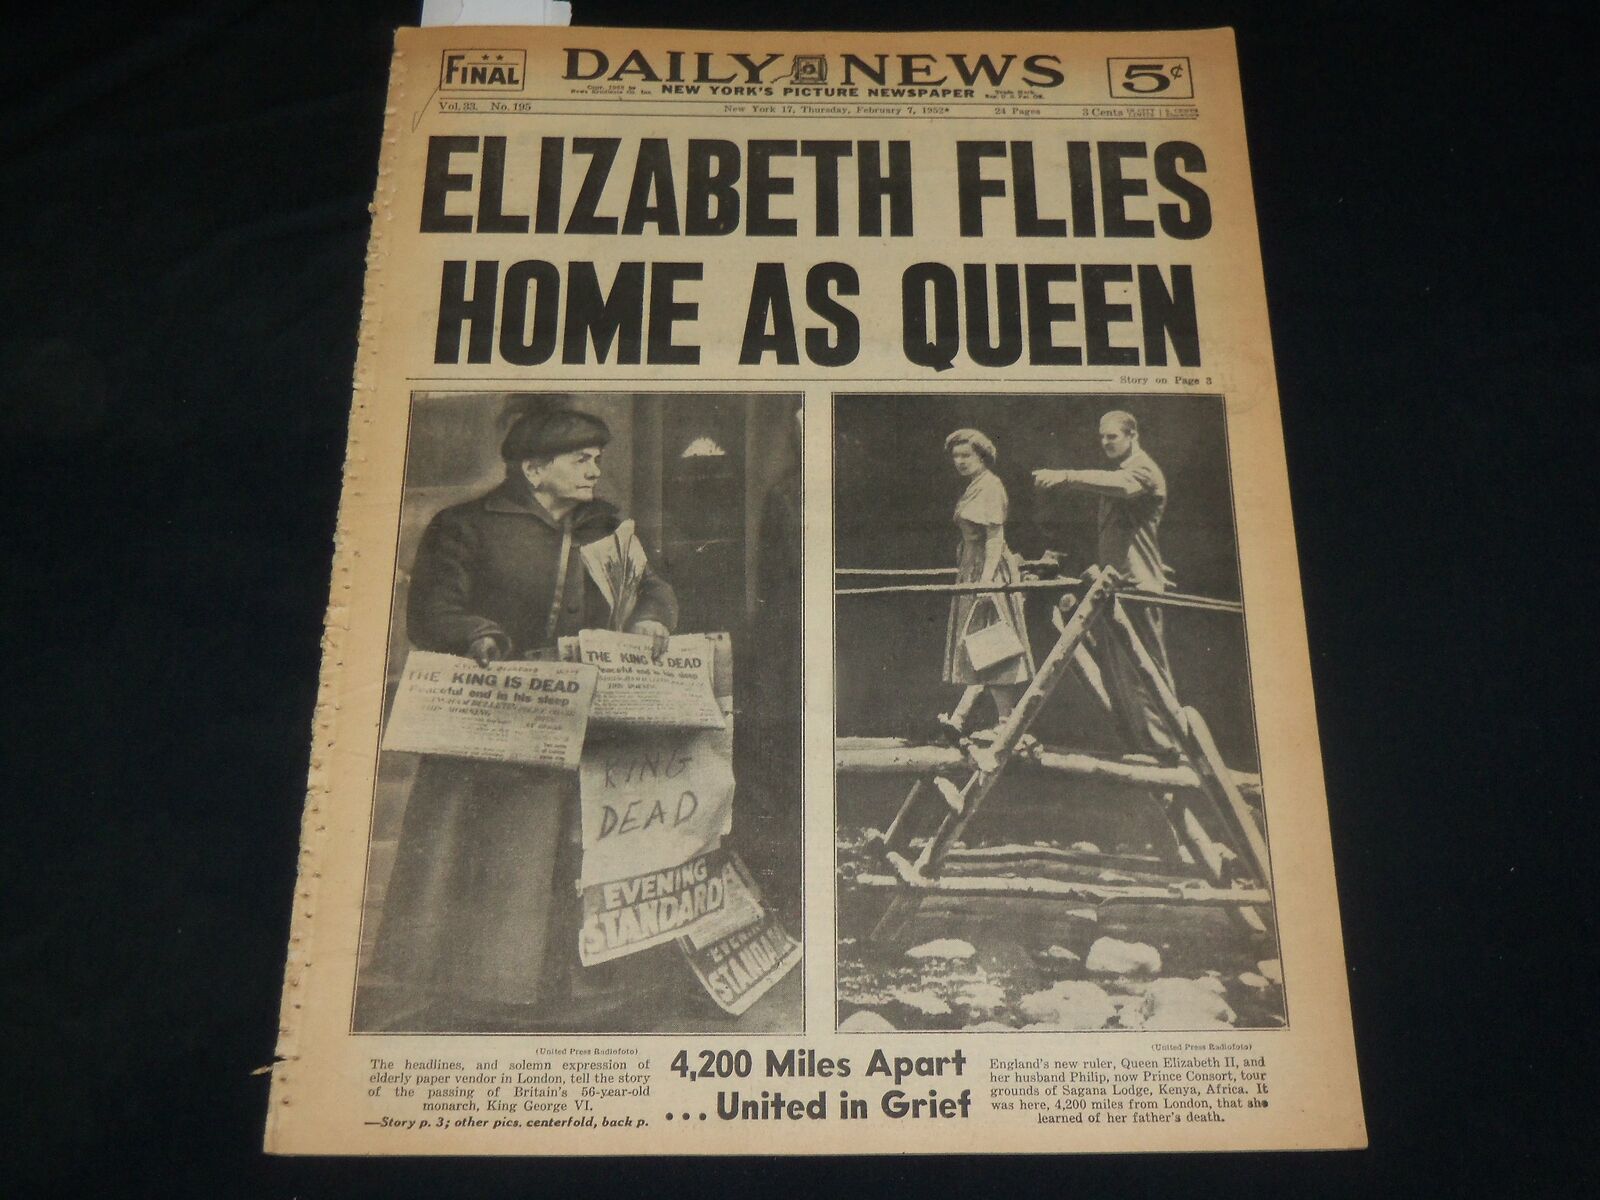 1952 FEBRUARY 7 NEW YORK DAILY NEWS - ELIZABETH FLIES HOME AS QUEEN - NP 5390